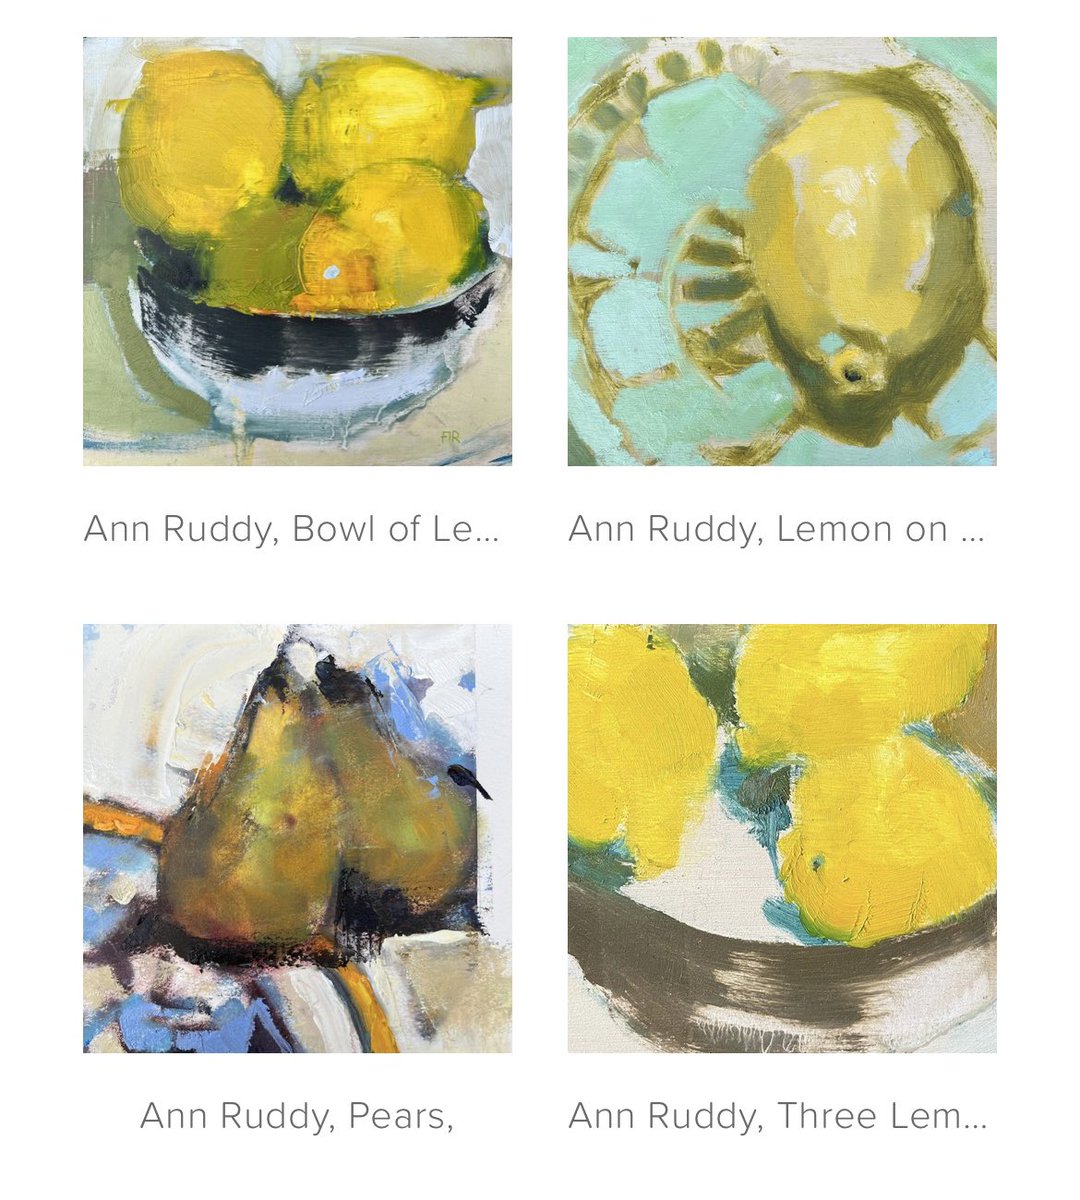 'I have some still lifes showing at 'Anew ' mixed exhibition at Aberfeldy Watermill Gallery showing until June #anew #exhibition #aberfeldywatermill #gallery #mixedexhibition #stilllifepainting #lemon #pear